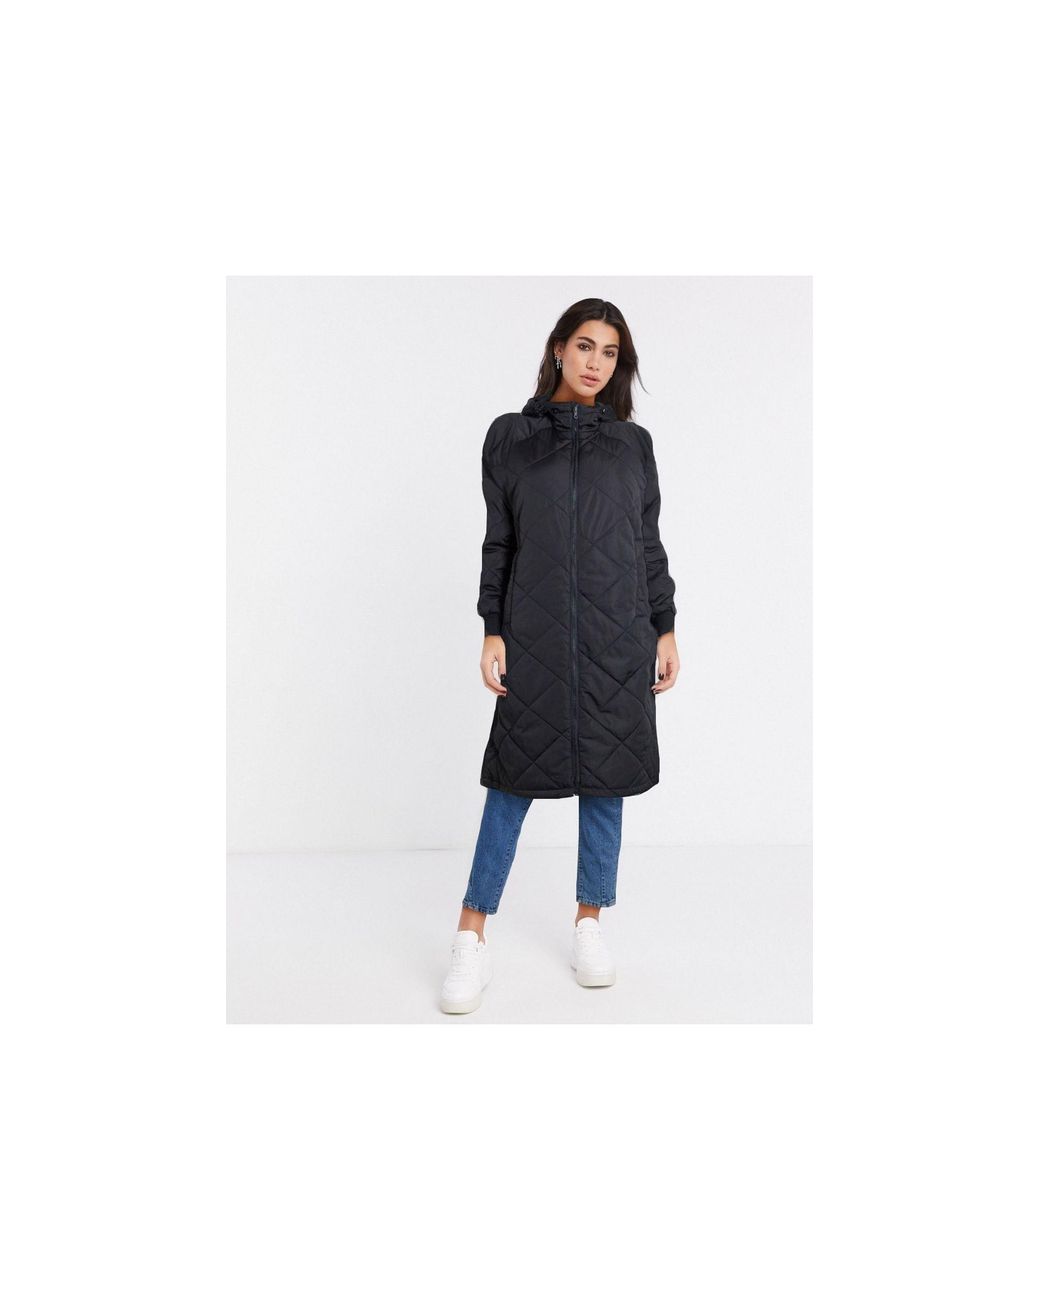 SELECTED Maddy Quilted Coat in Black - Lyst